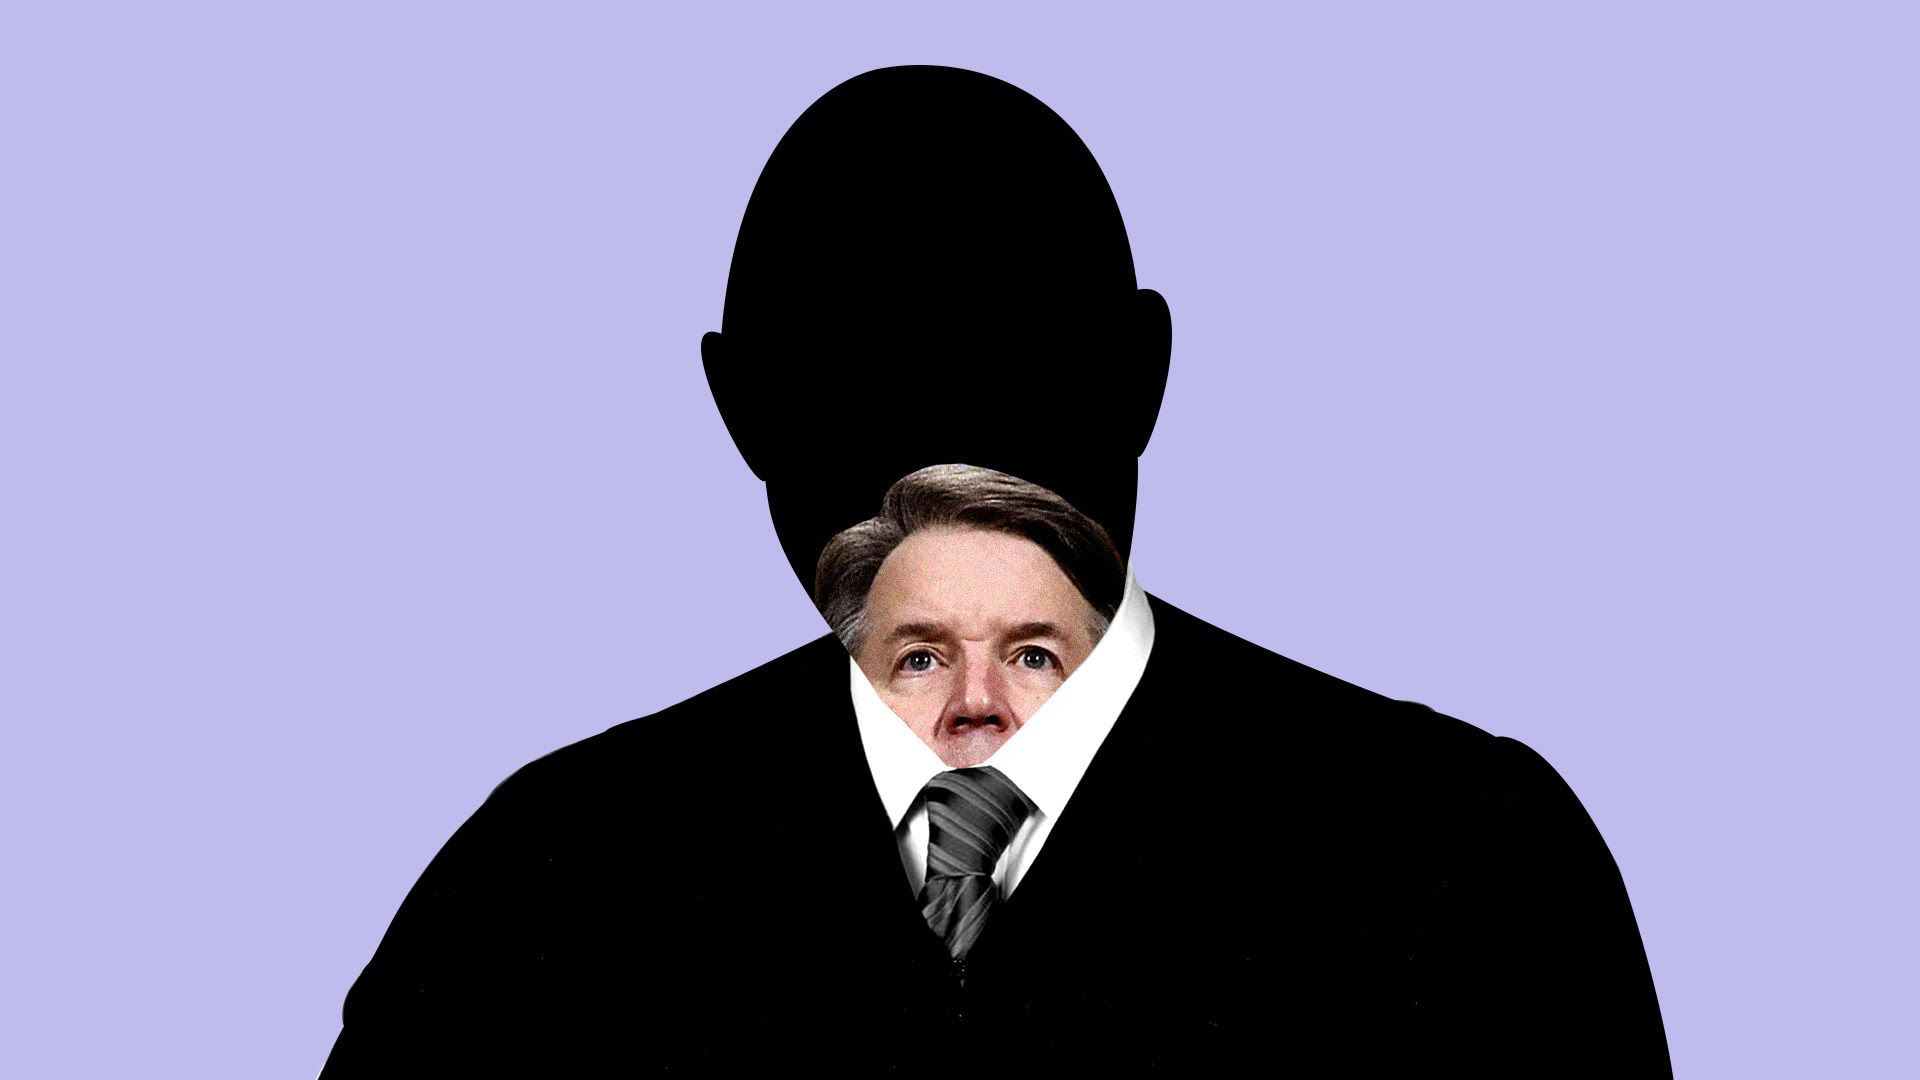 An illustration of a man's silhouette with Kavanaugh's head shrinking in it